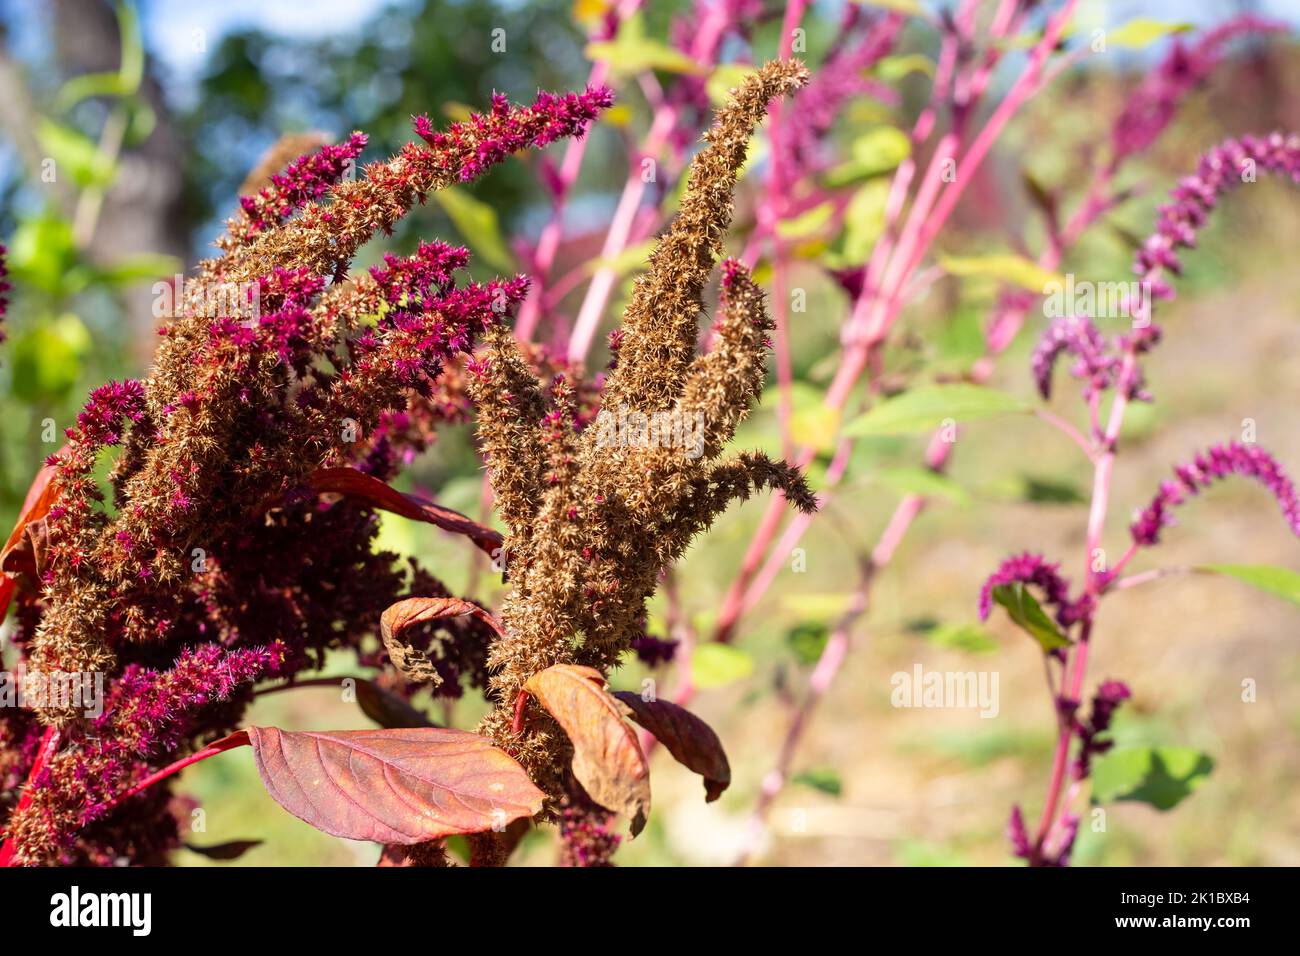 Seeds of red vegetable amaranth on a plant branch. Cultivation of a bright ornamental garden plant. Stock Photo